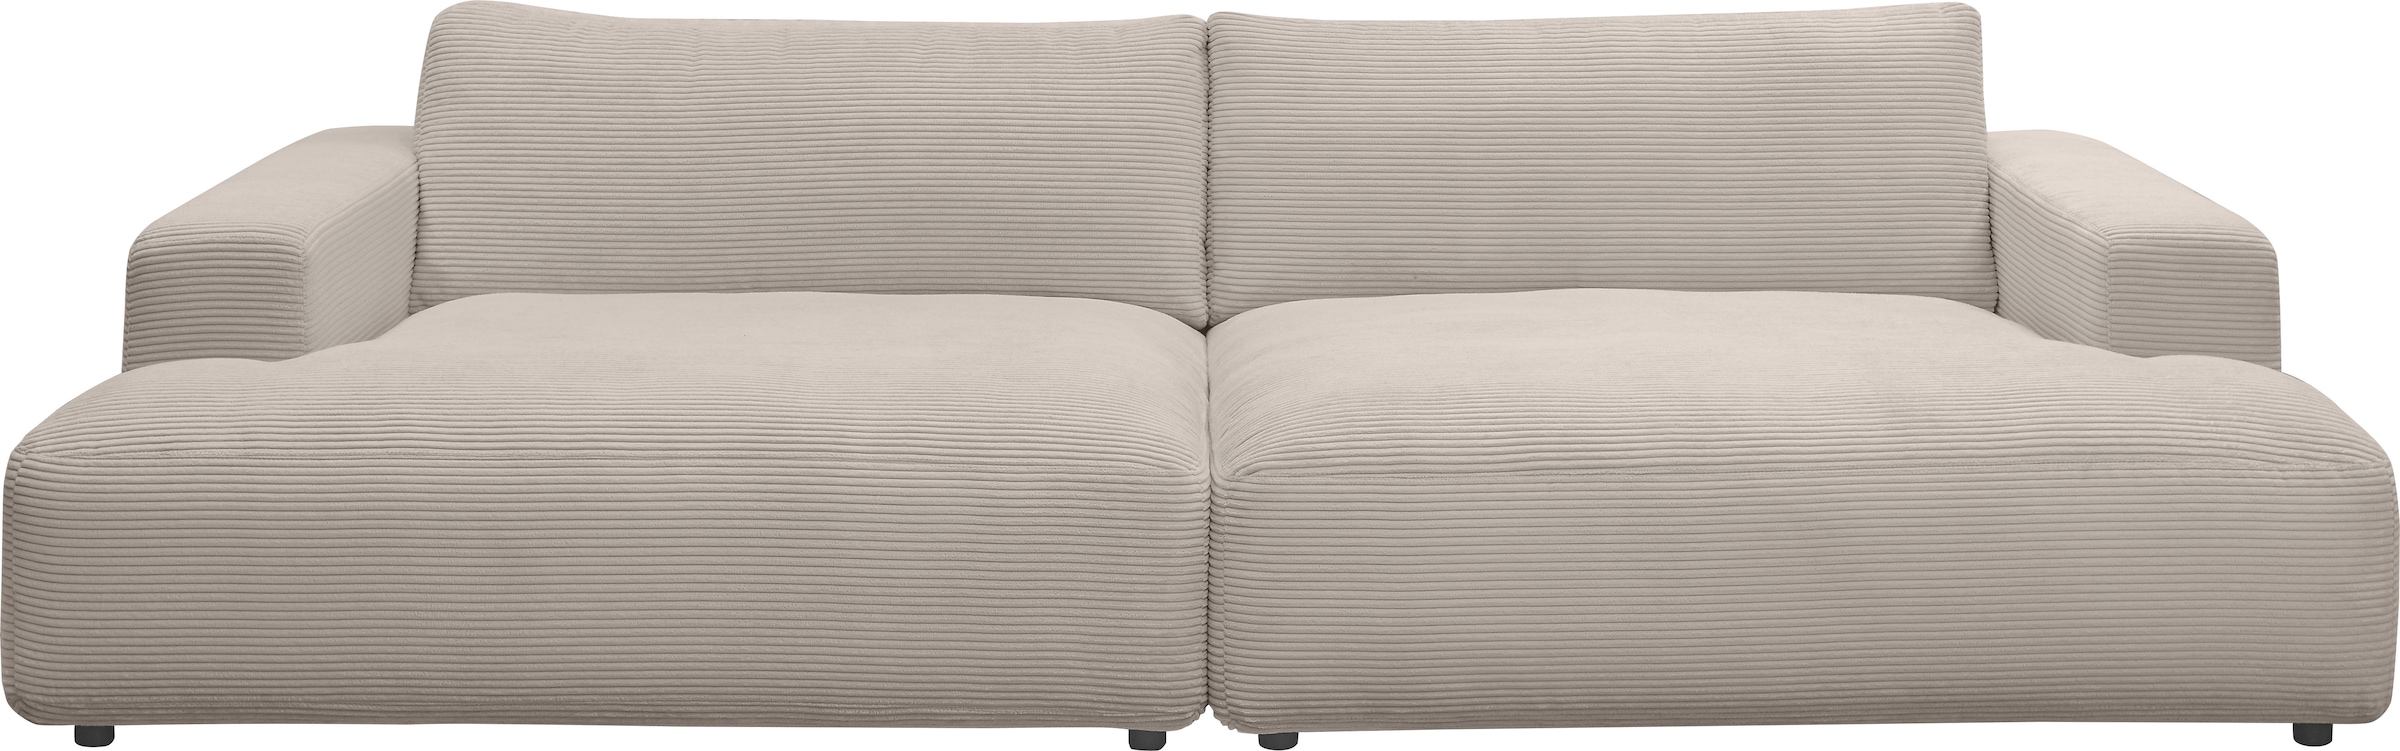 GALLERY M branded by kaufen bequem Cord-Bezug, cm 292 Breite Loungesofa »Lucia«, Musterring